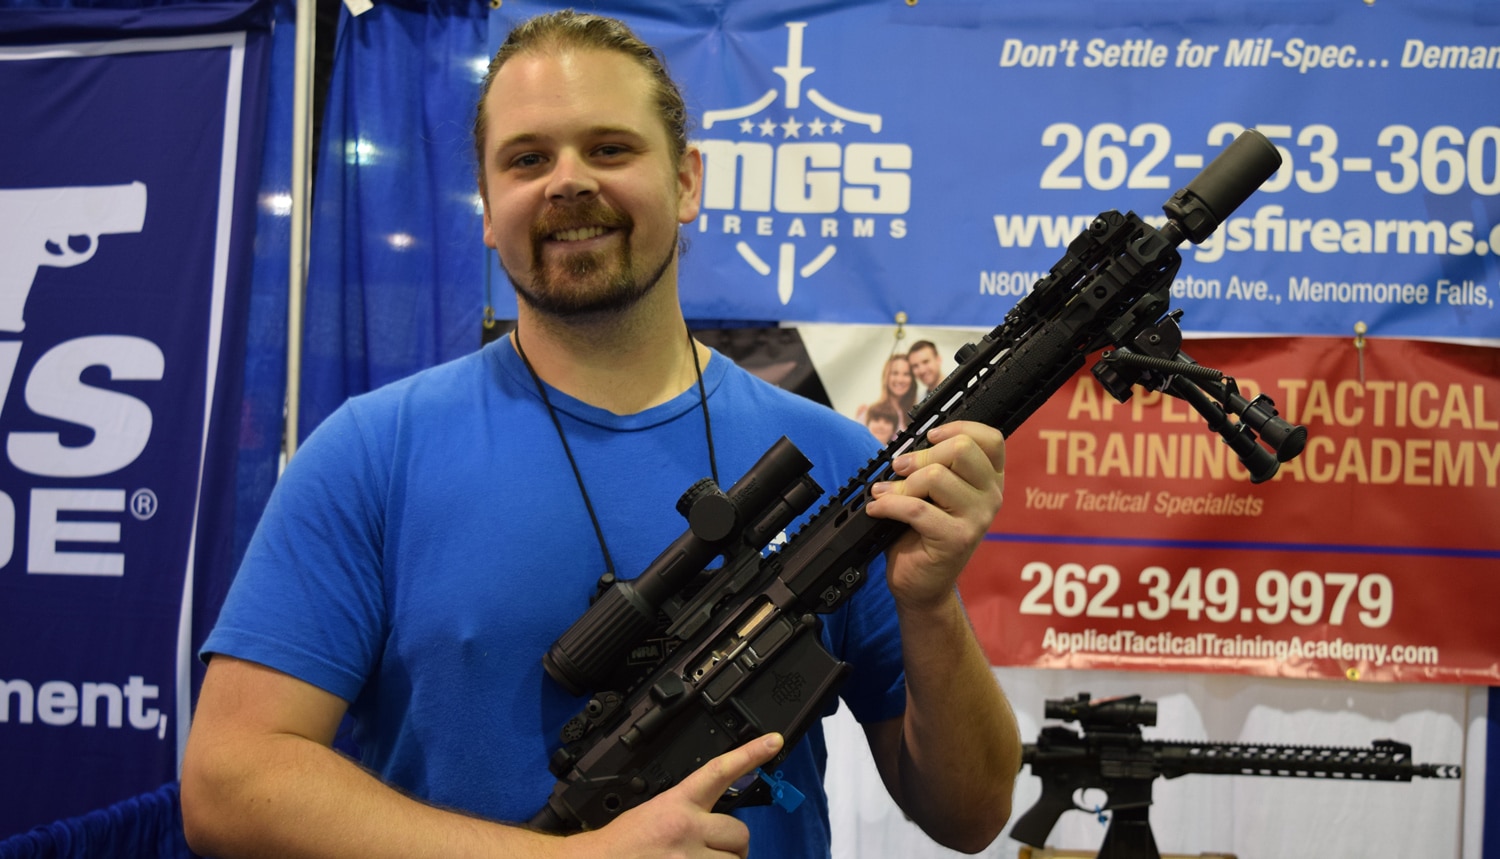 Pulling out all the gear with MGS Firearms. (Photo: Daniel Terrill/Guns.com)